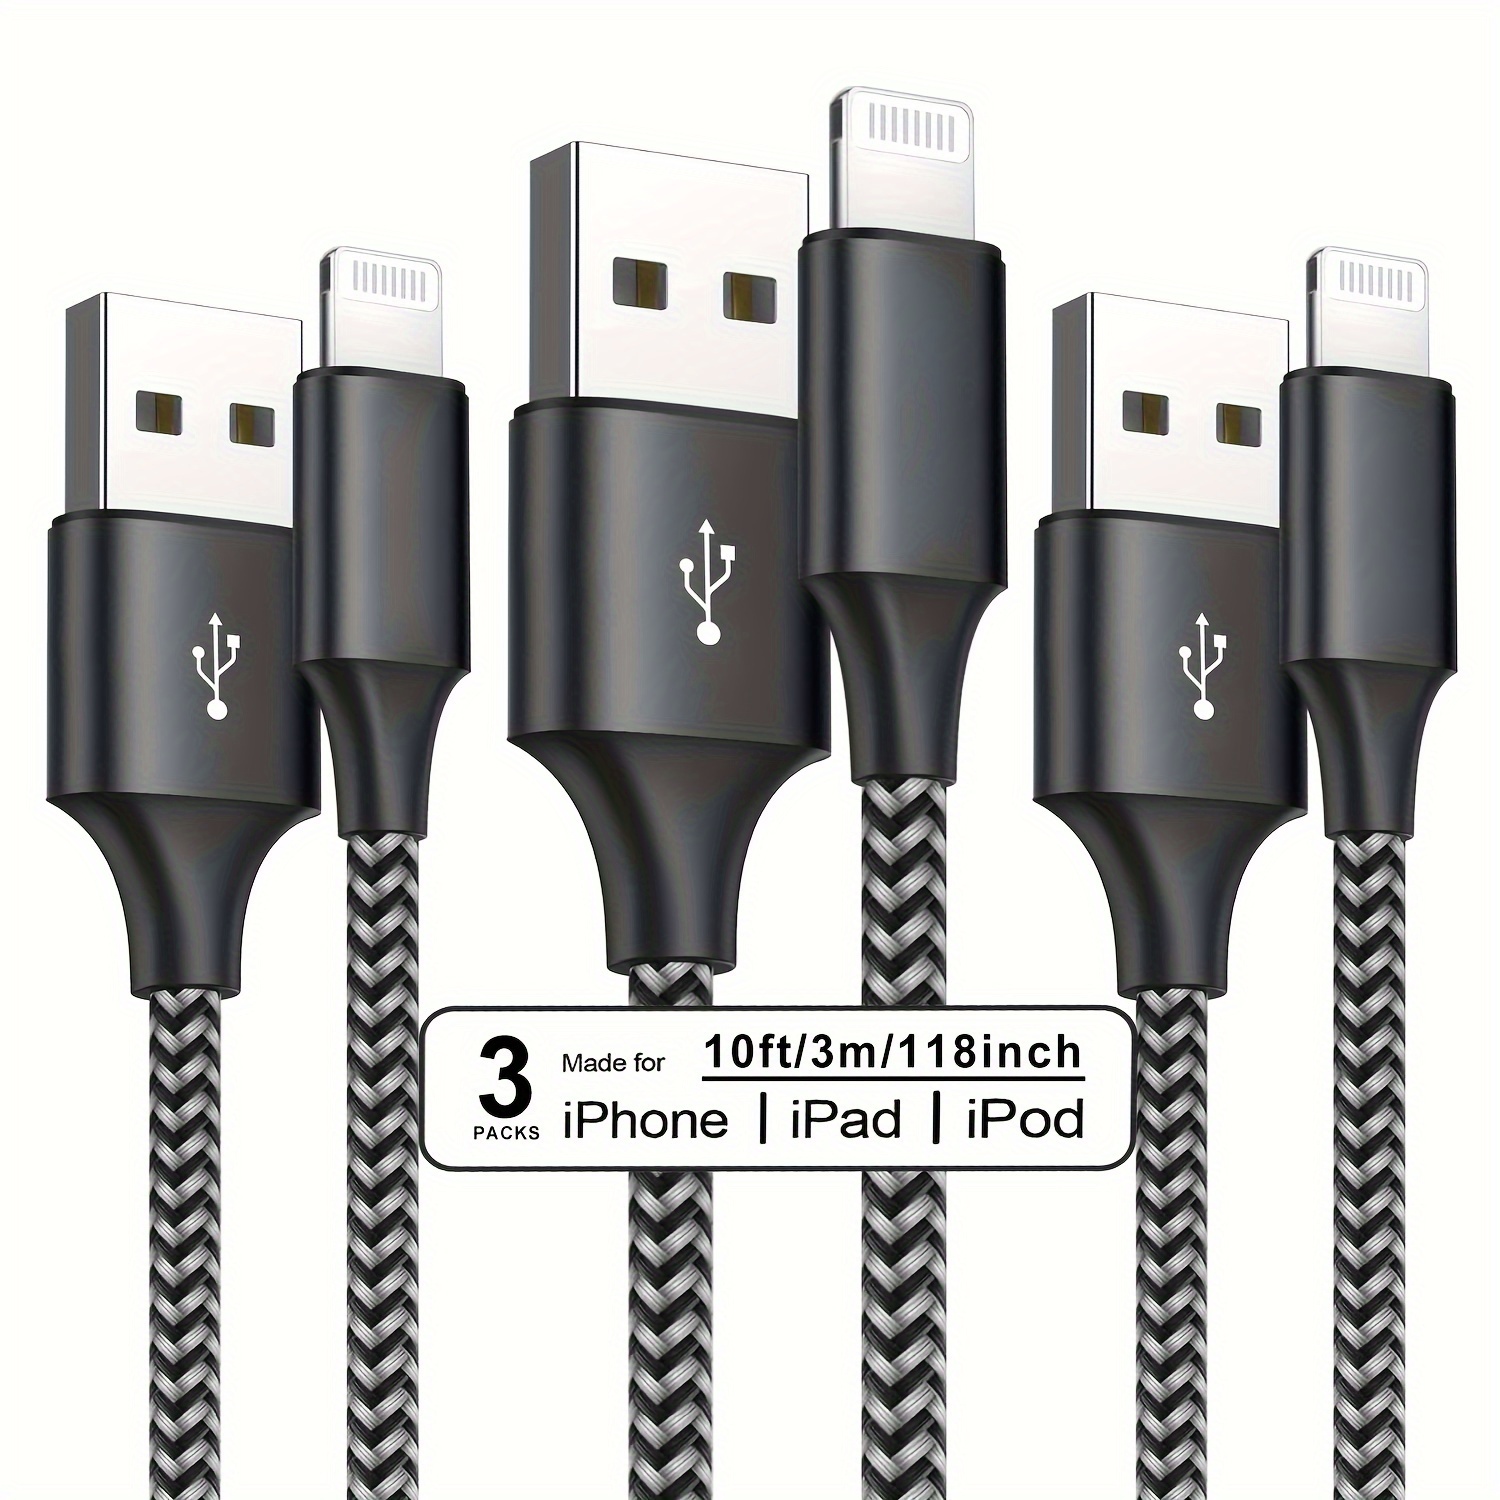 Black and White Glow Lightning Cable [10 ft / 3m length] – Charge